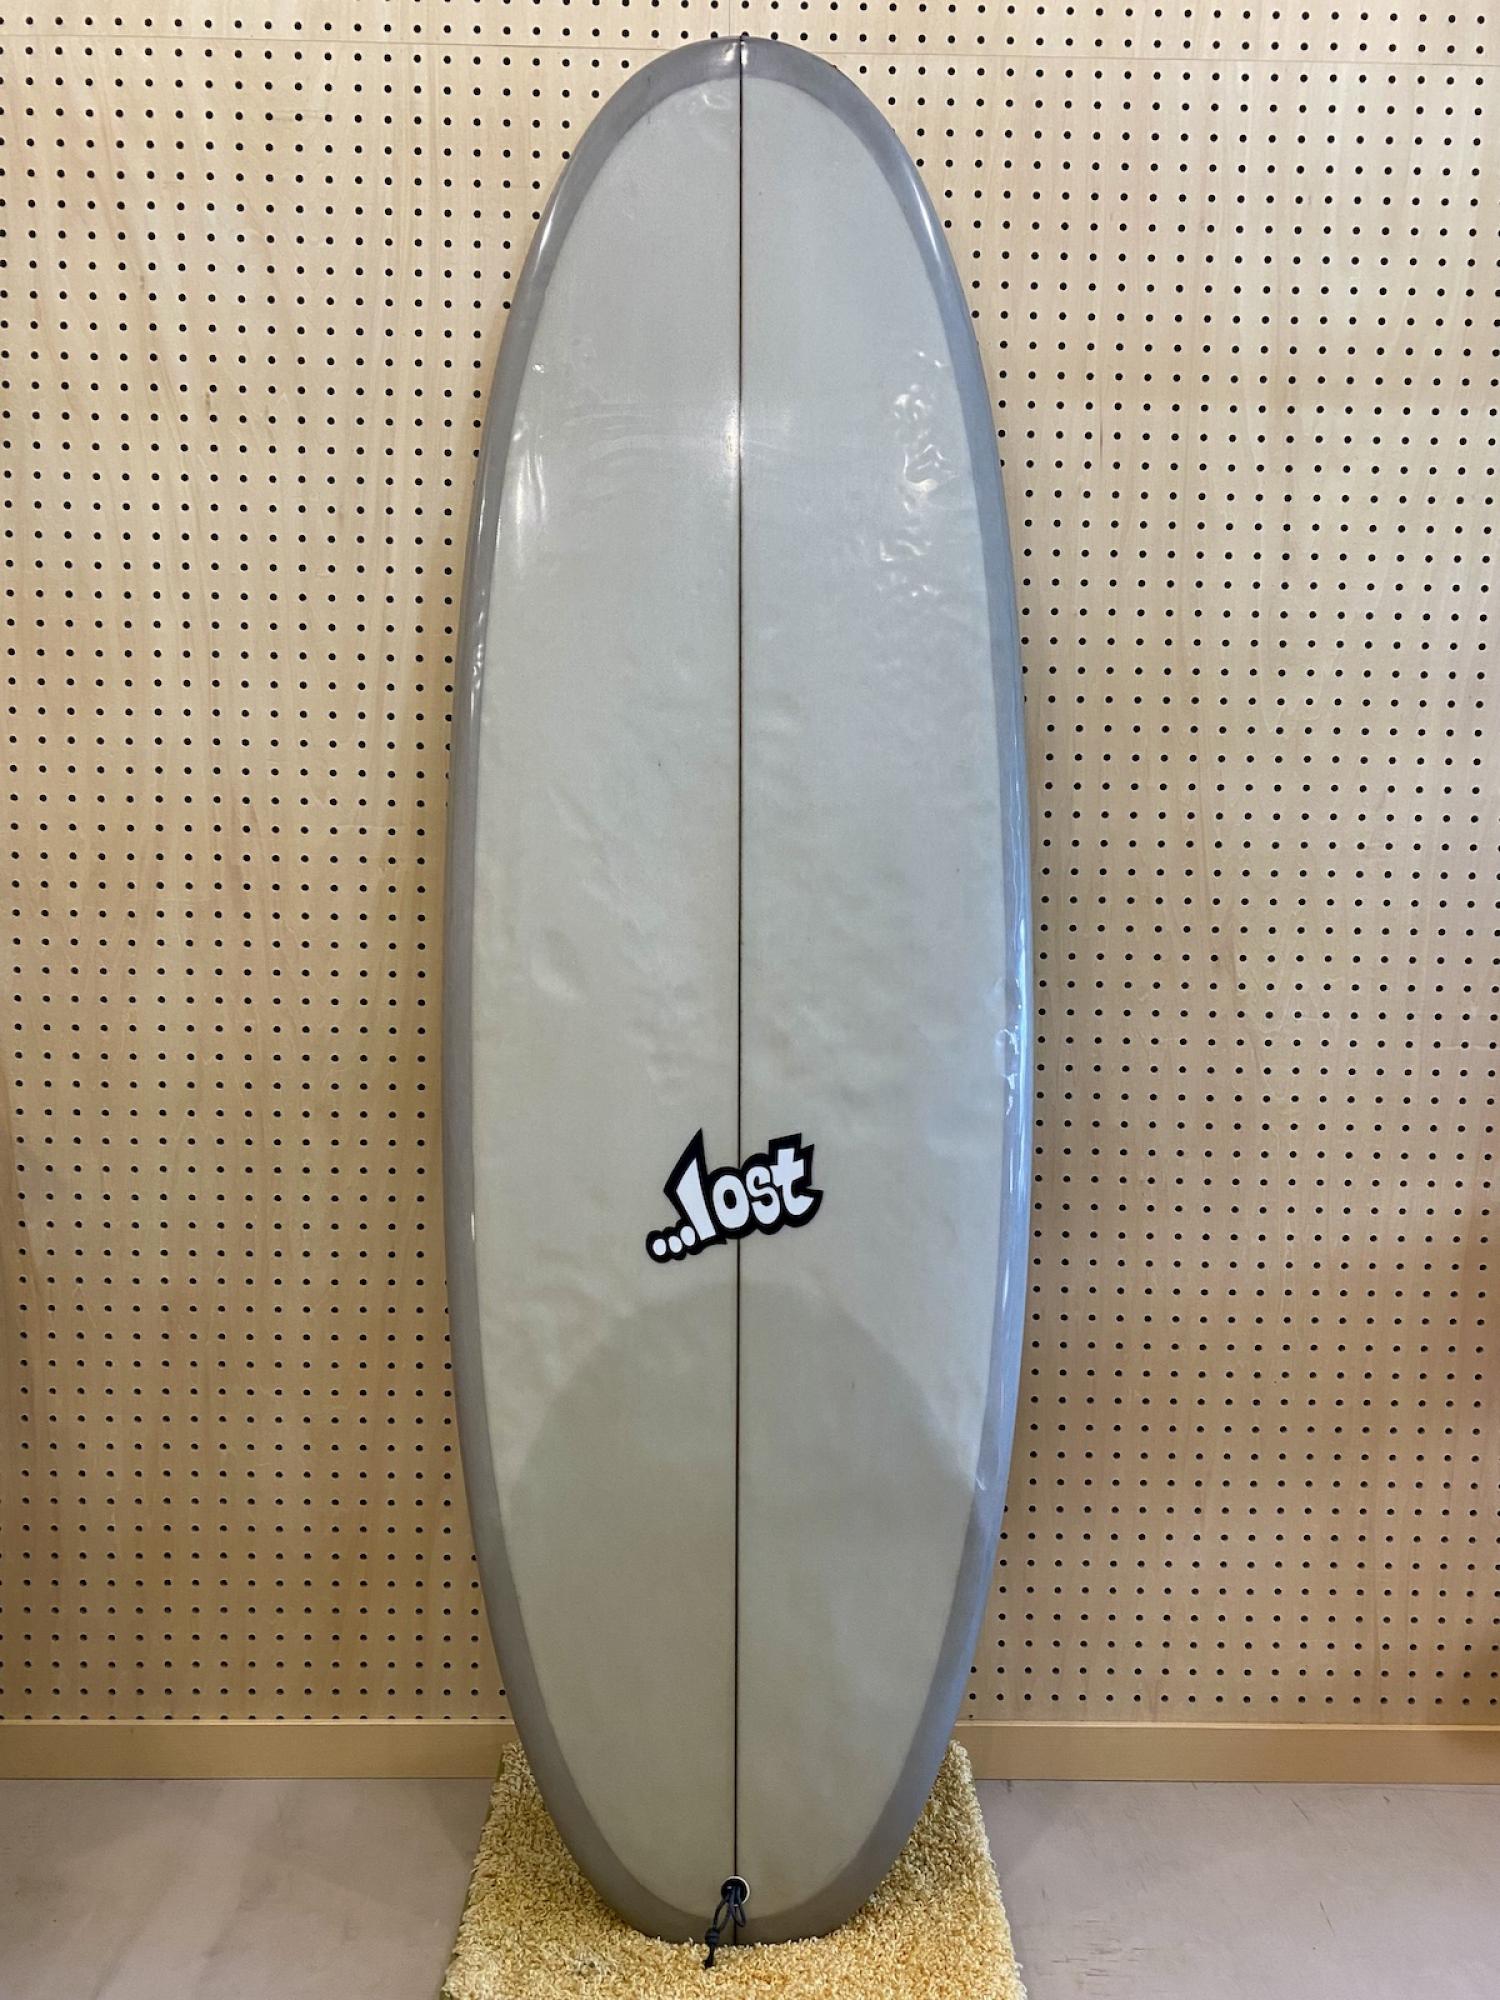 USED BOARDS (LOST BEAN BAG 6.0)